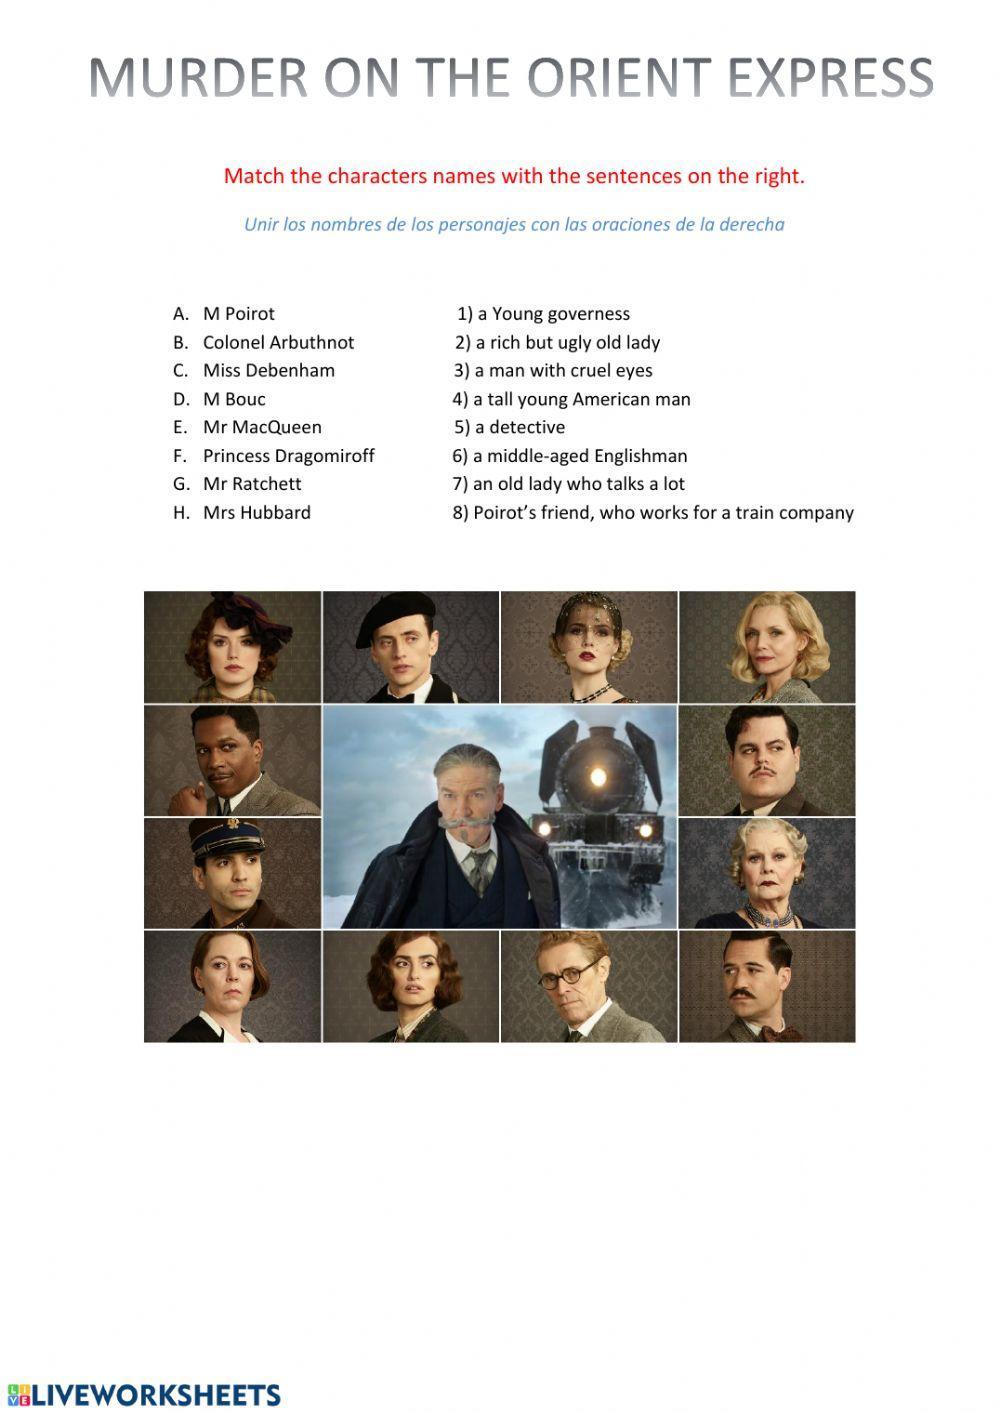 Murder on the Orient Express characters